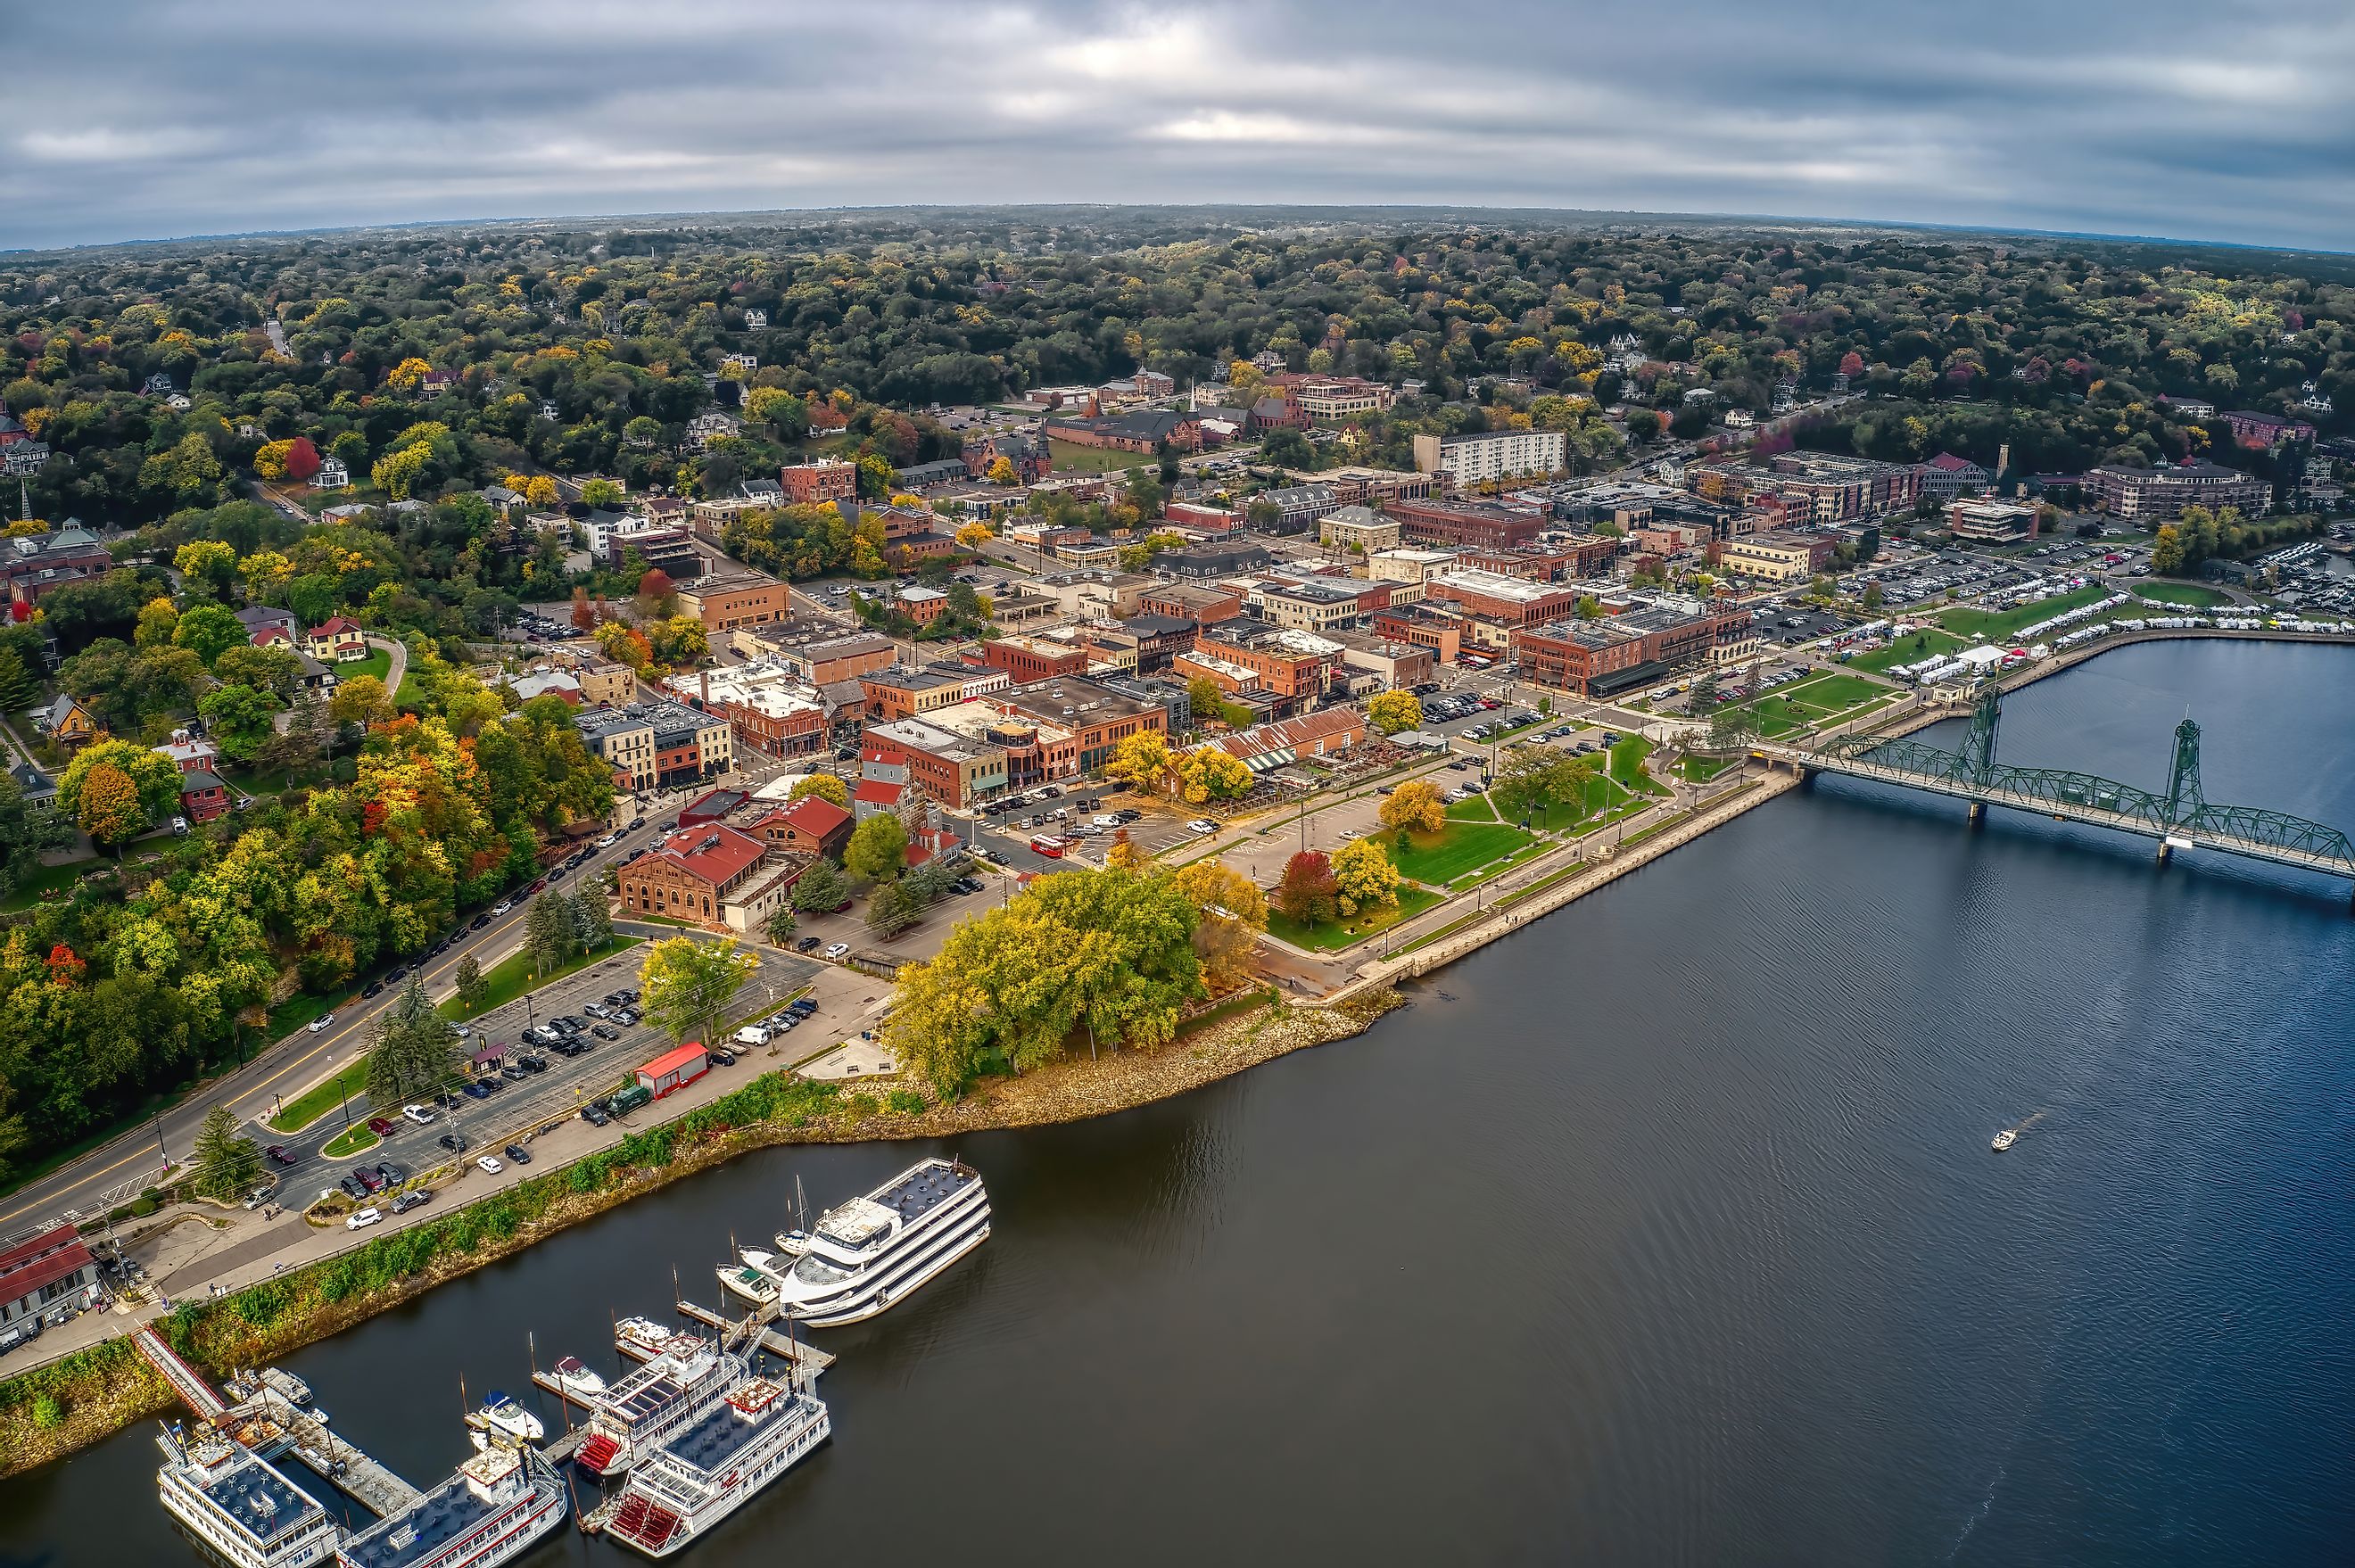 The town of Stillwater on the banks of the St. Croix River.